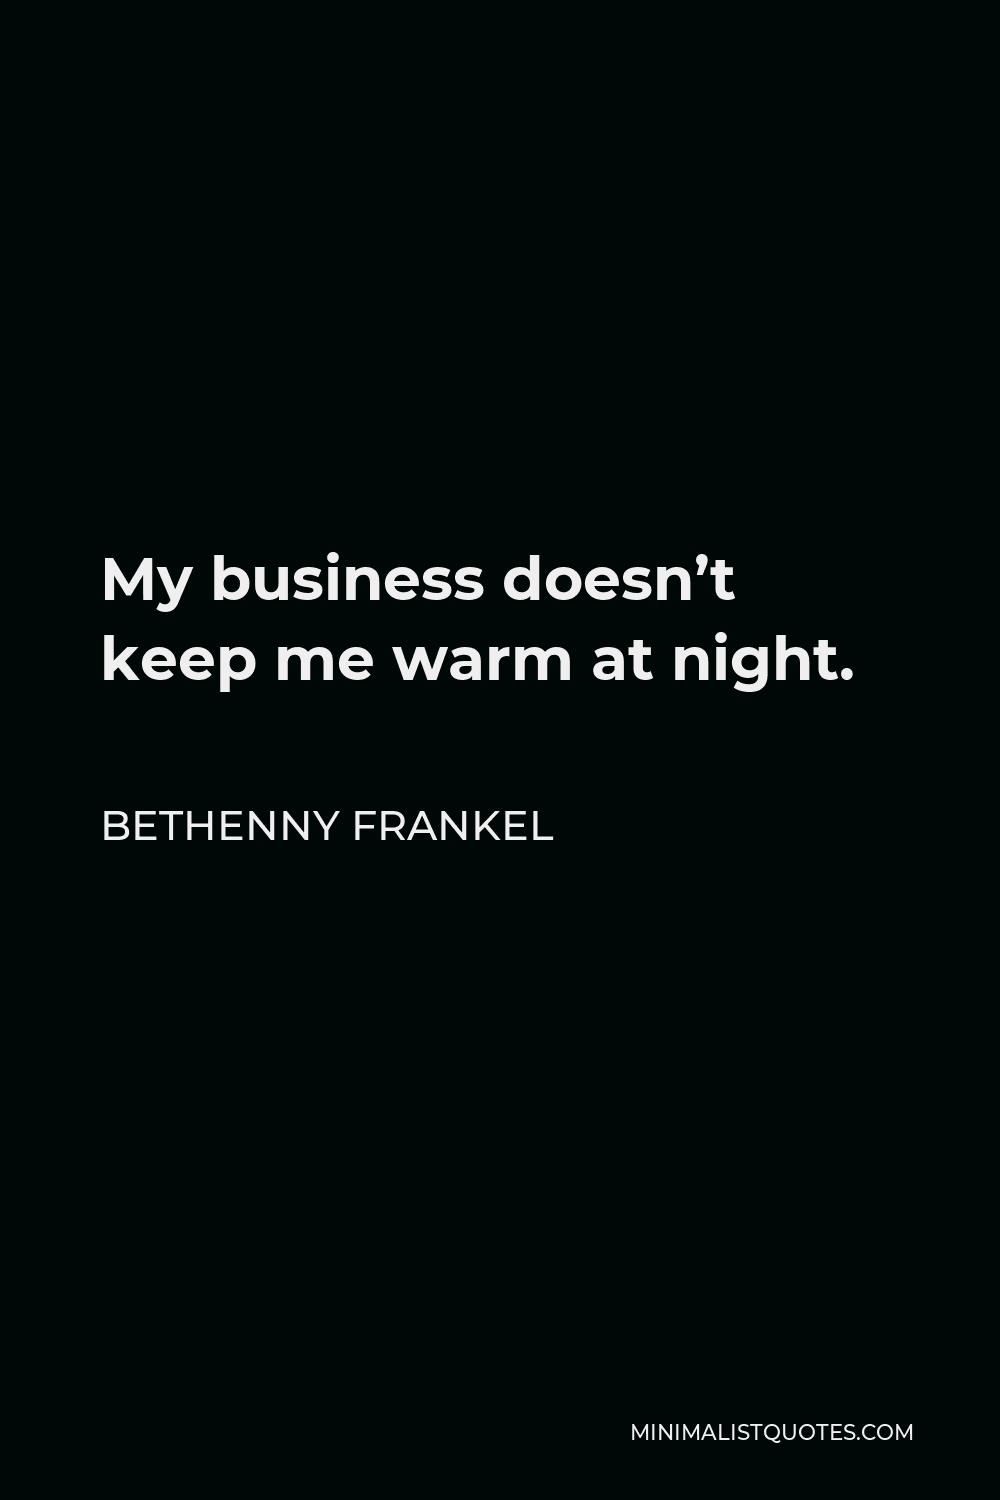 Bethenny Frankel Quote - My business doesn’t keep me warm at night.